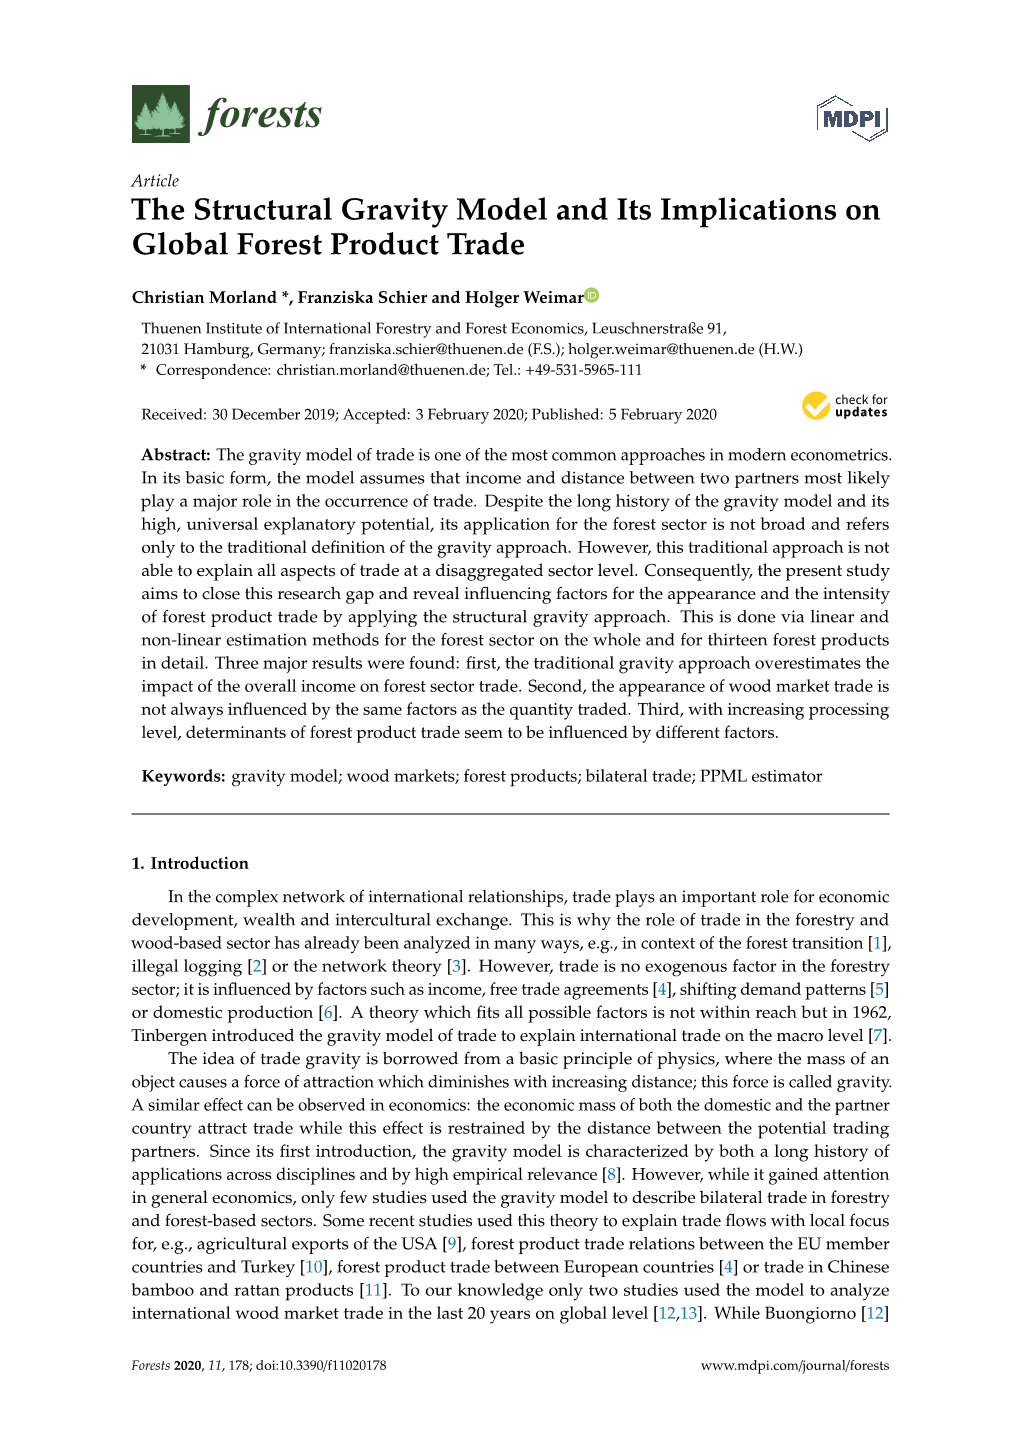 The Structural Gravity Model and Its Implications on Global Forest Product Trade